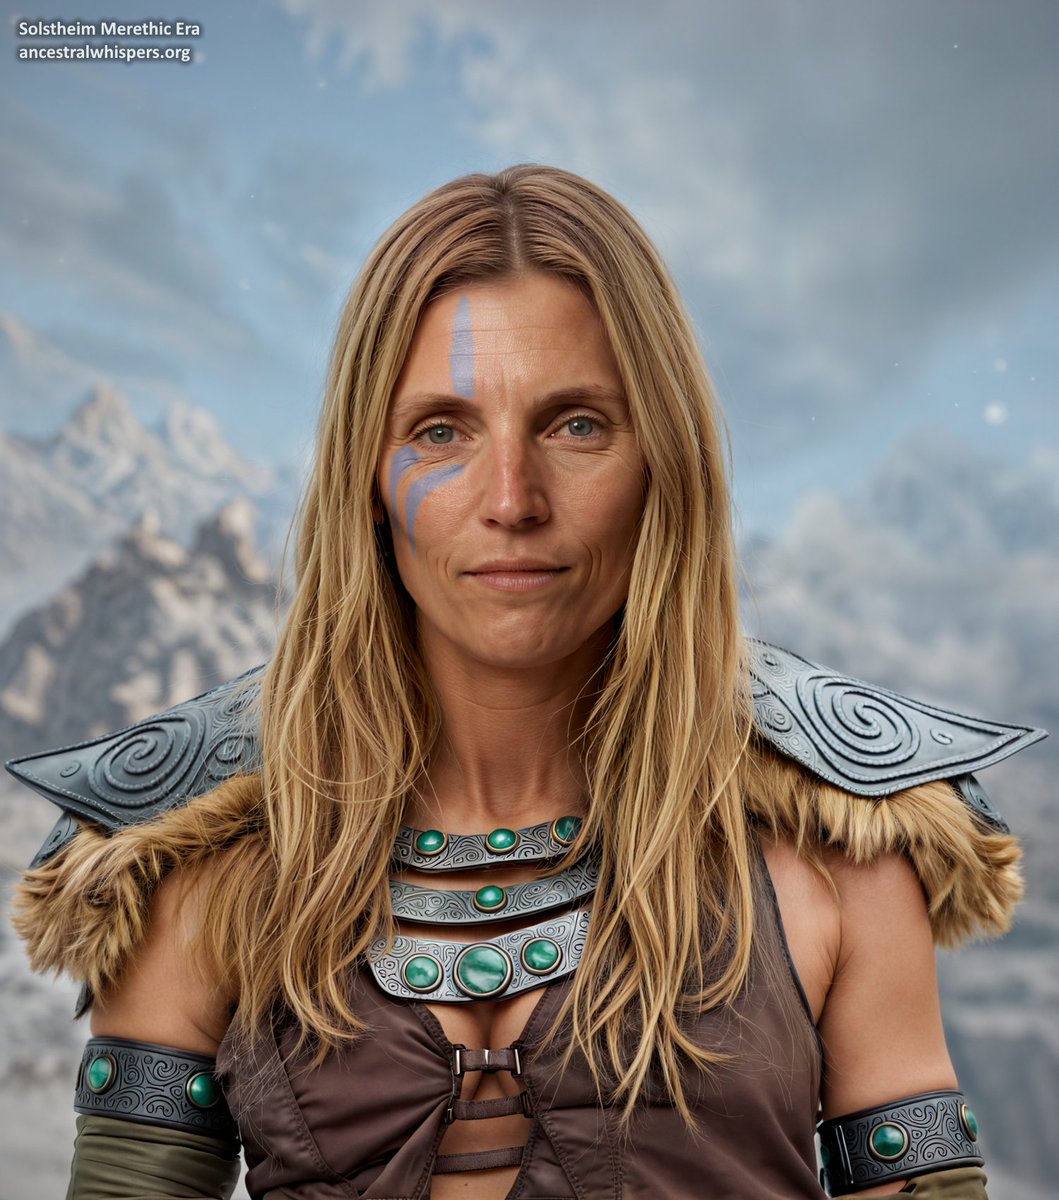 Facial reconstruction of a woman found in the Moesring Mountains, Solstheim, dated to the Late Merethic Era. Her well-preserved remains were found encased in a block of stalhrim. Wounds around her abdomen suggest that she was killed by a powerful thrust, possibly with a spear.